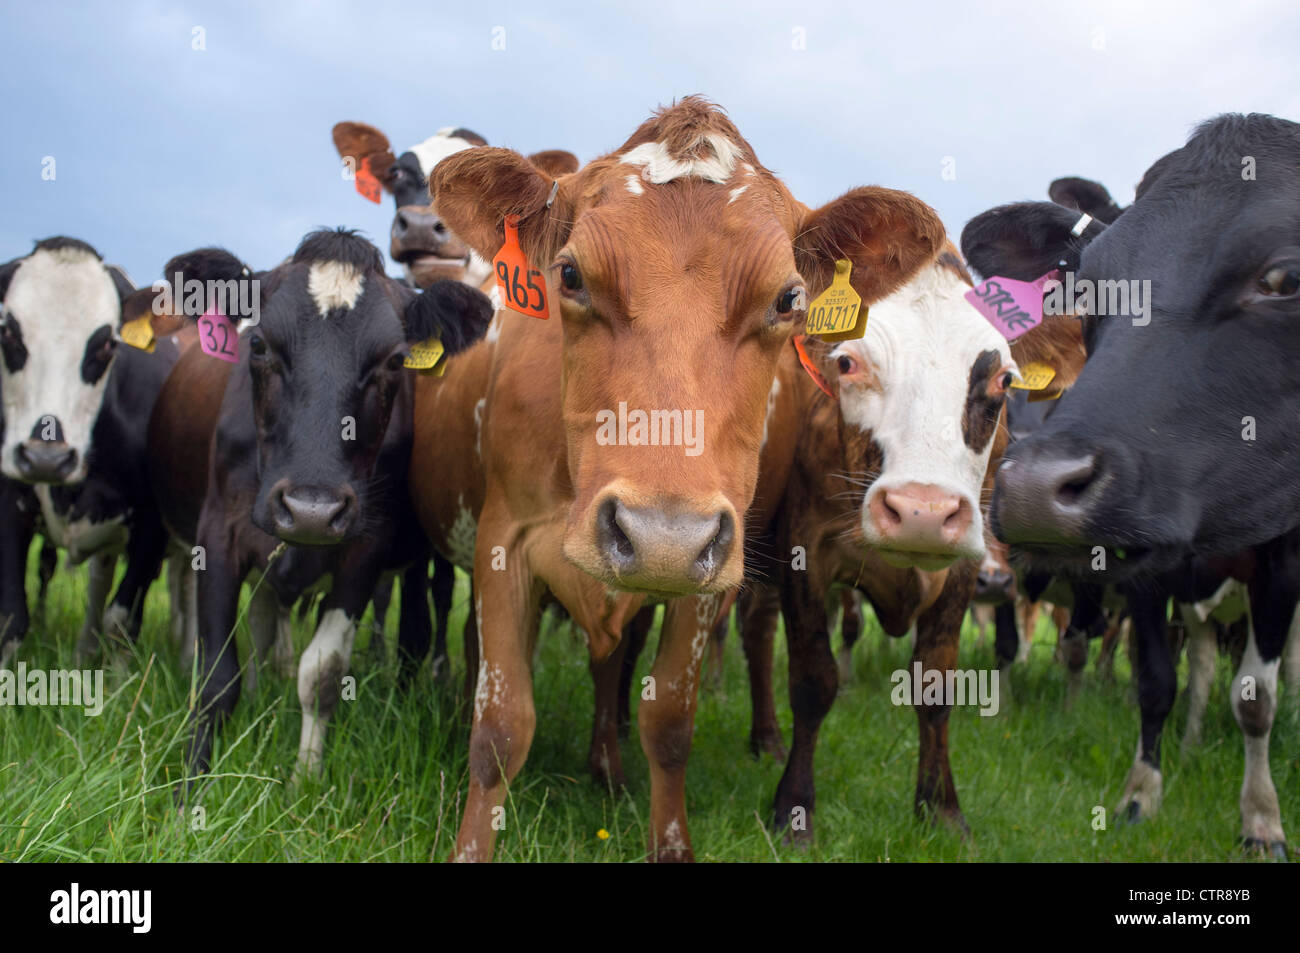 Cows in Field Stock Photo